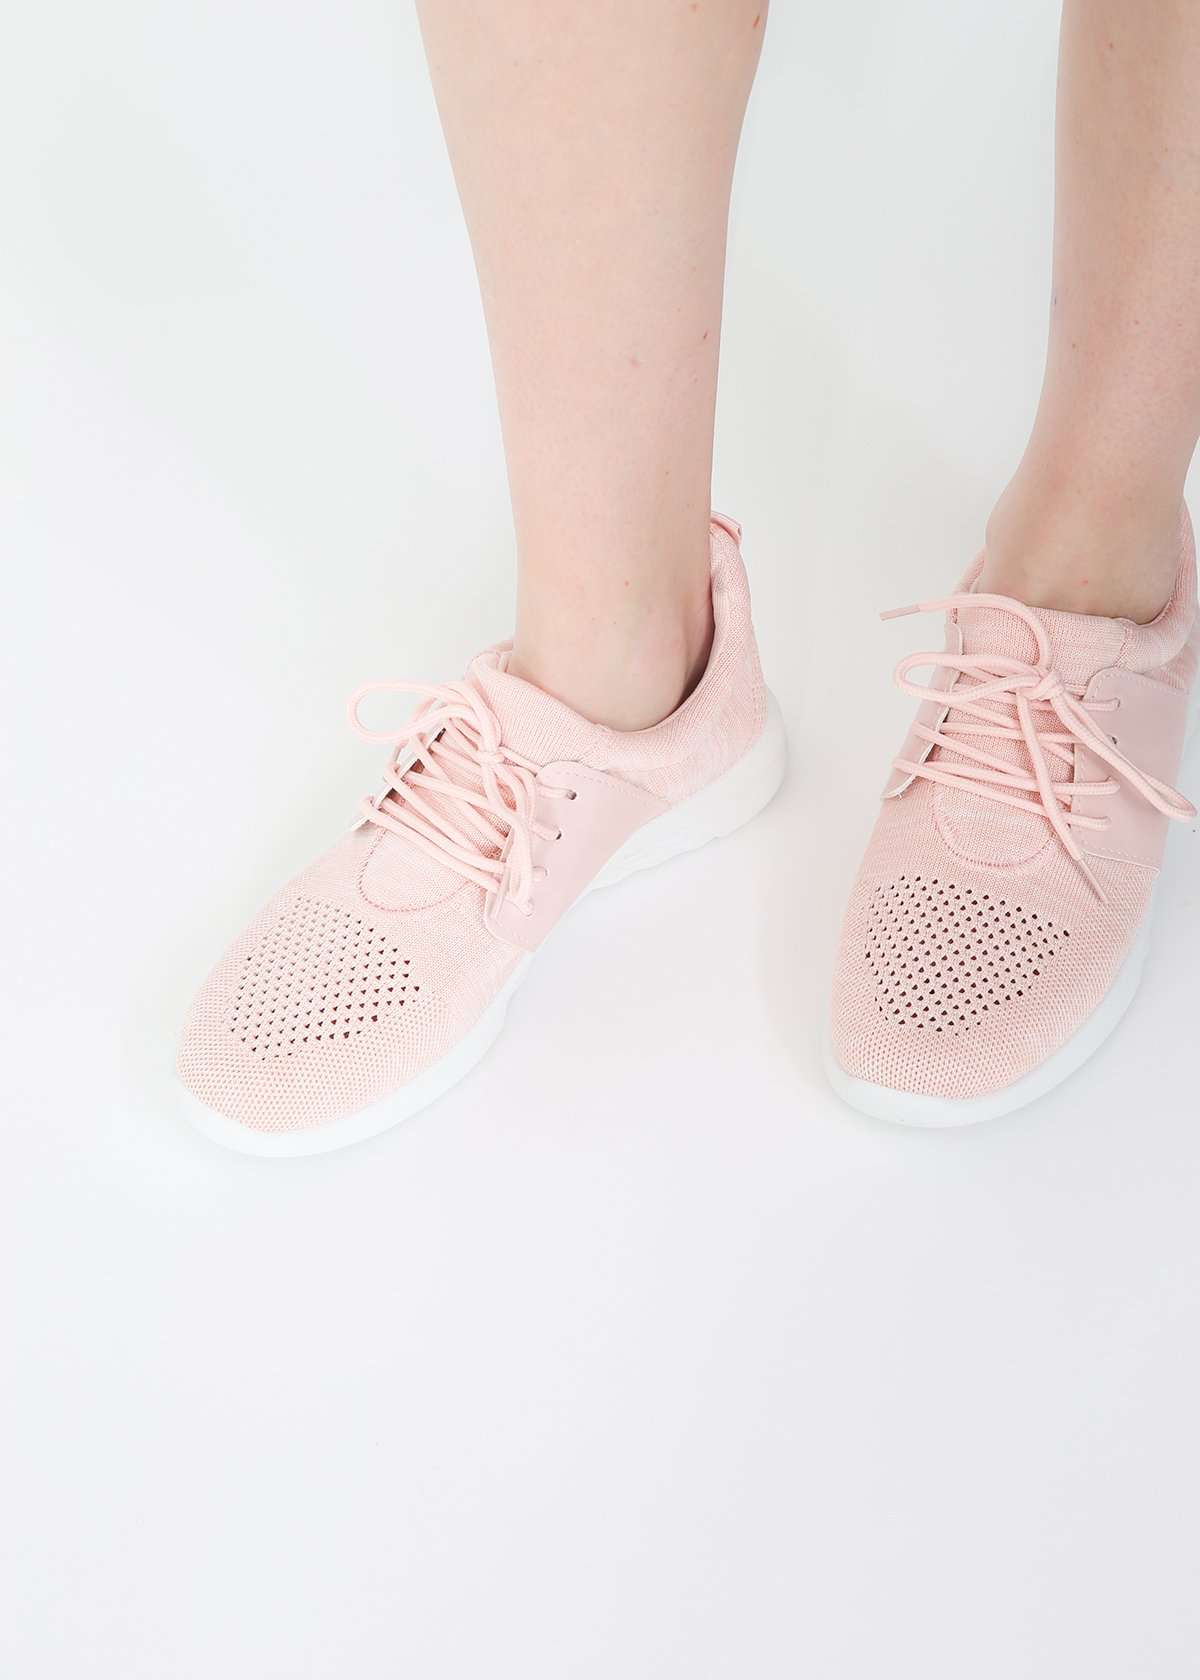 blush colored lace up women's sneaker